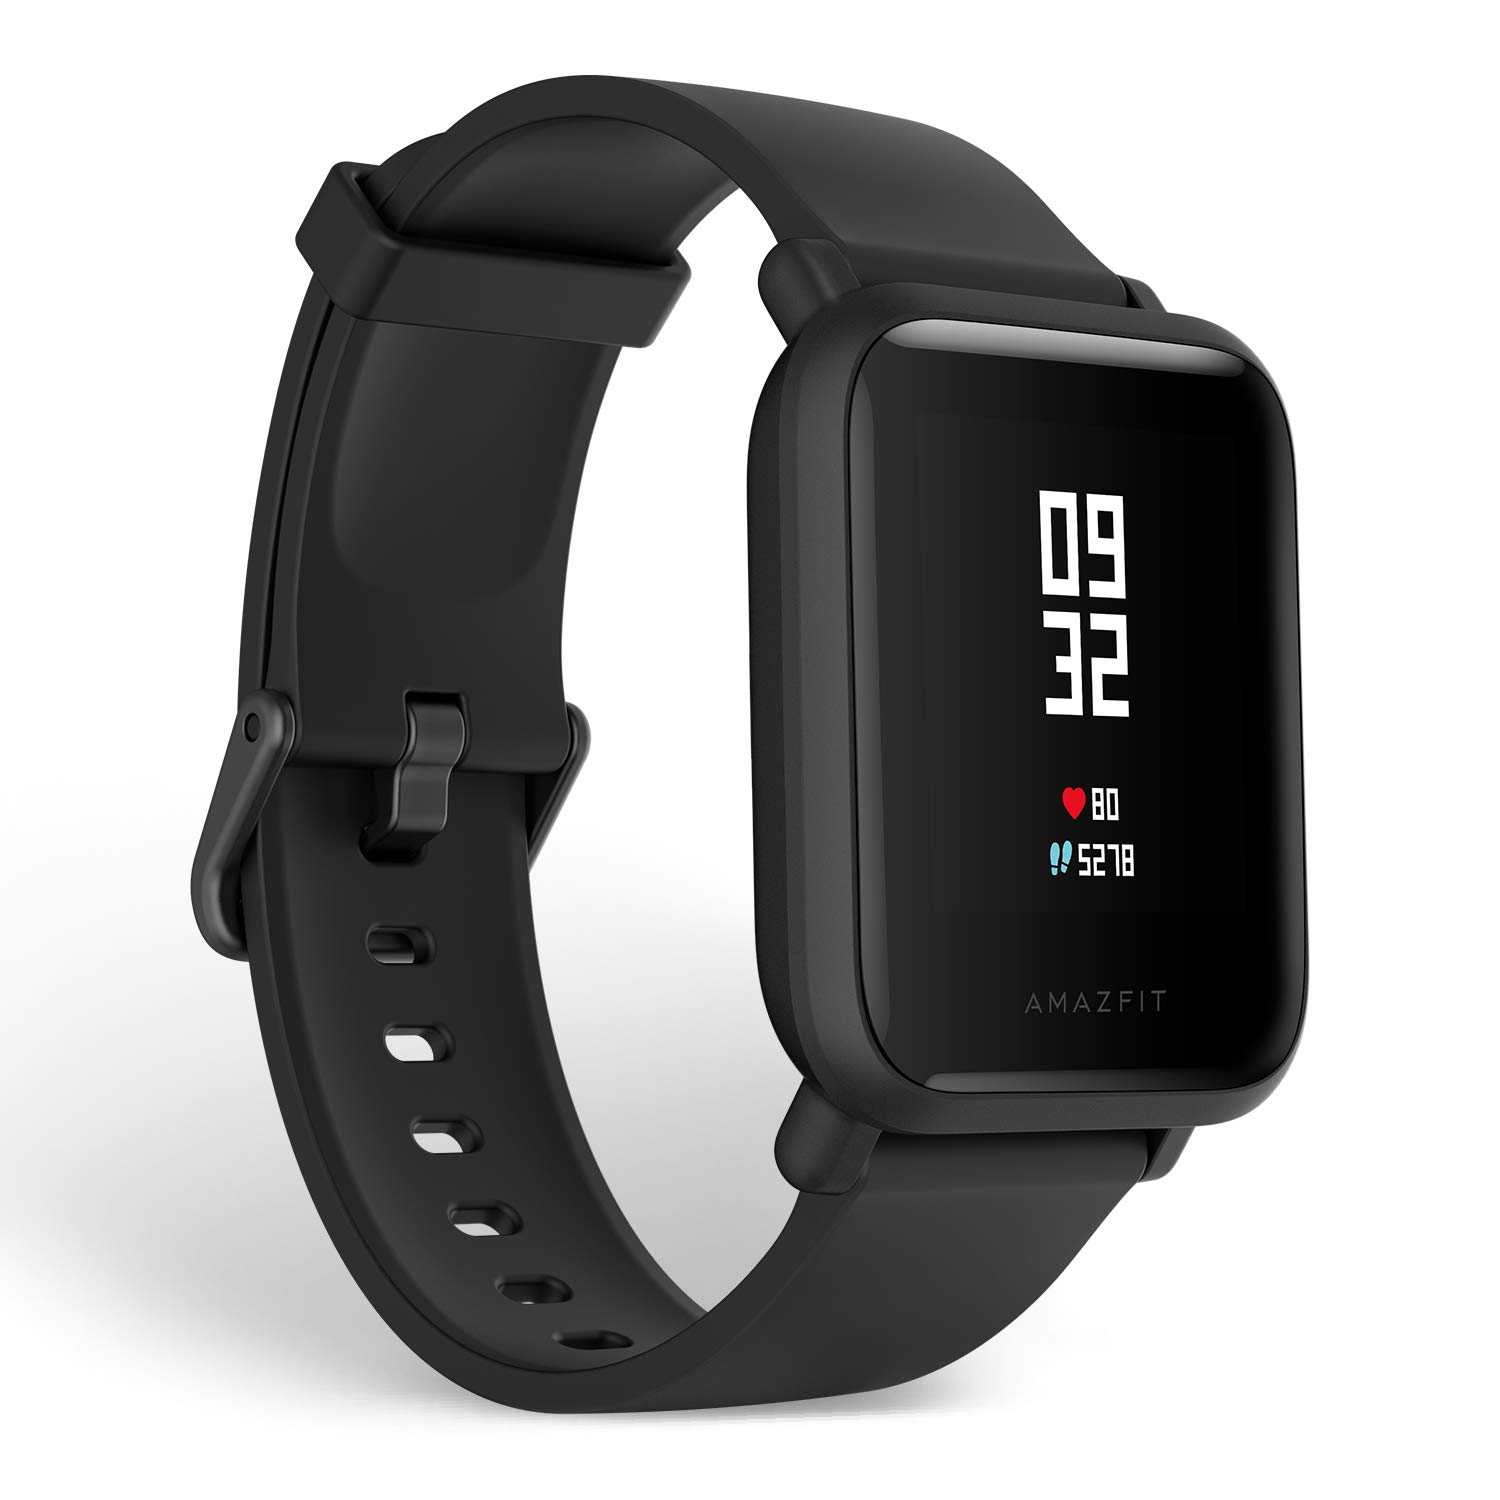 Amazon.com: Amazfit Bip 3 Pro Smart Watch for Android iPhone, GPS 1.69